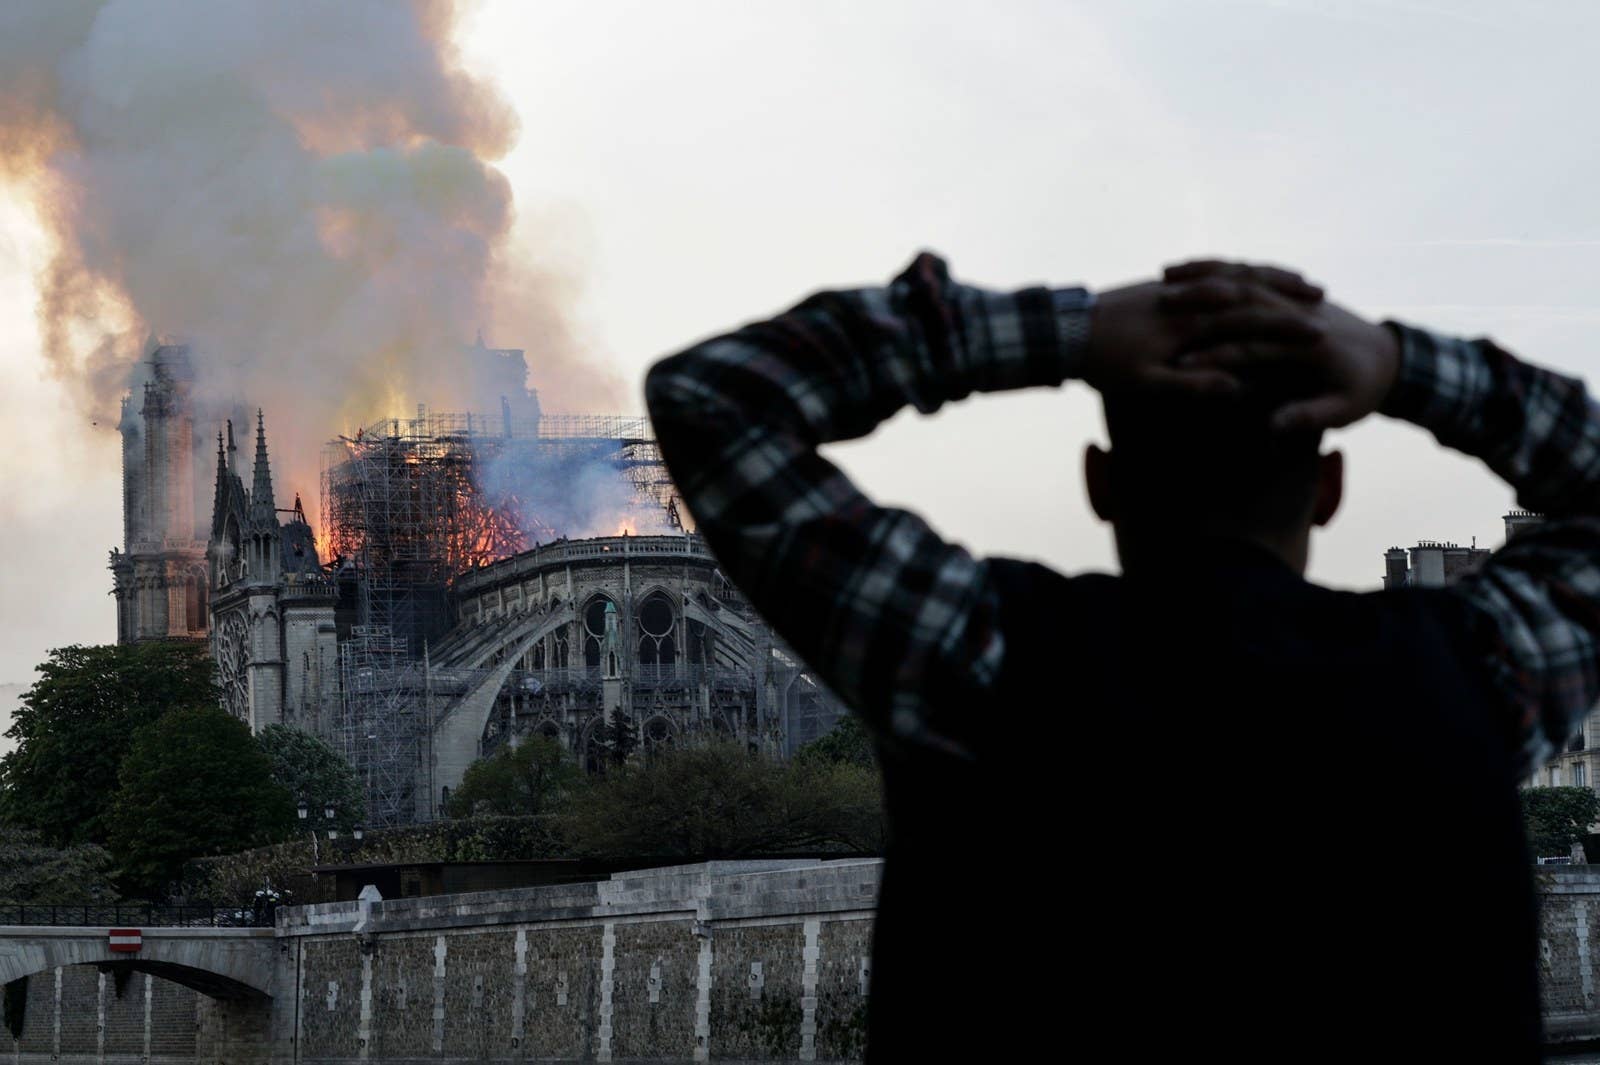 A man watches the landmark Notre-Dame Cathedral, engulfed in flames, in central Paris on April 15, 2019.